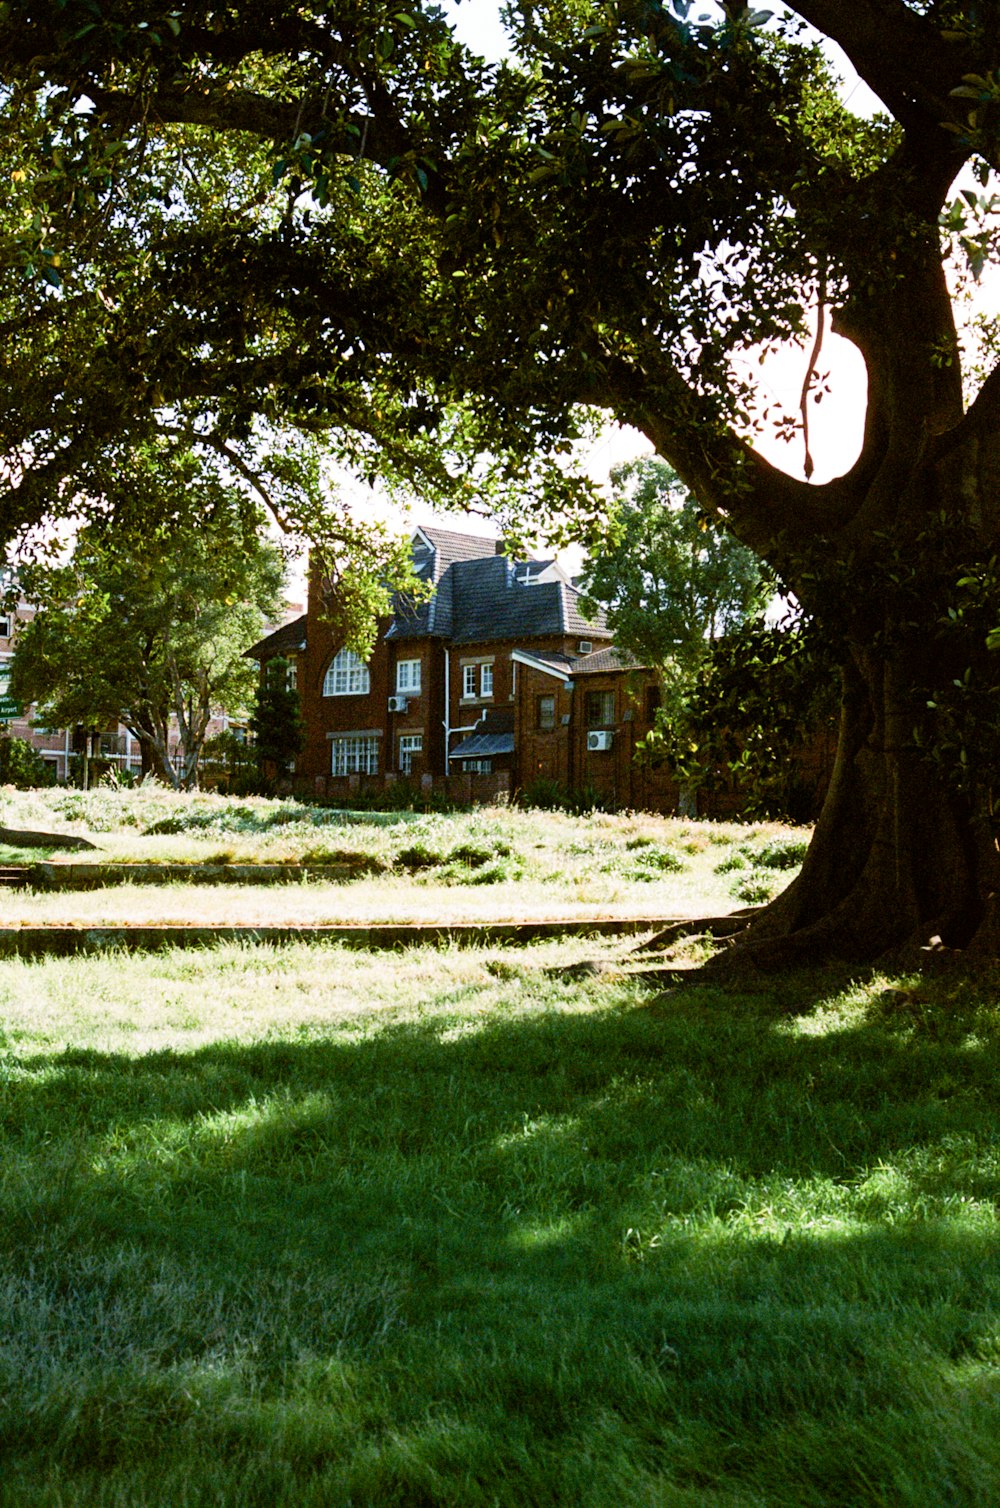 brown and white house near green grass field during daytime